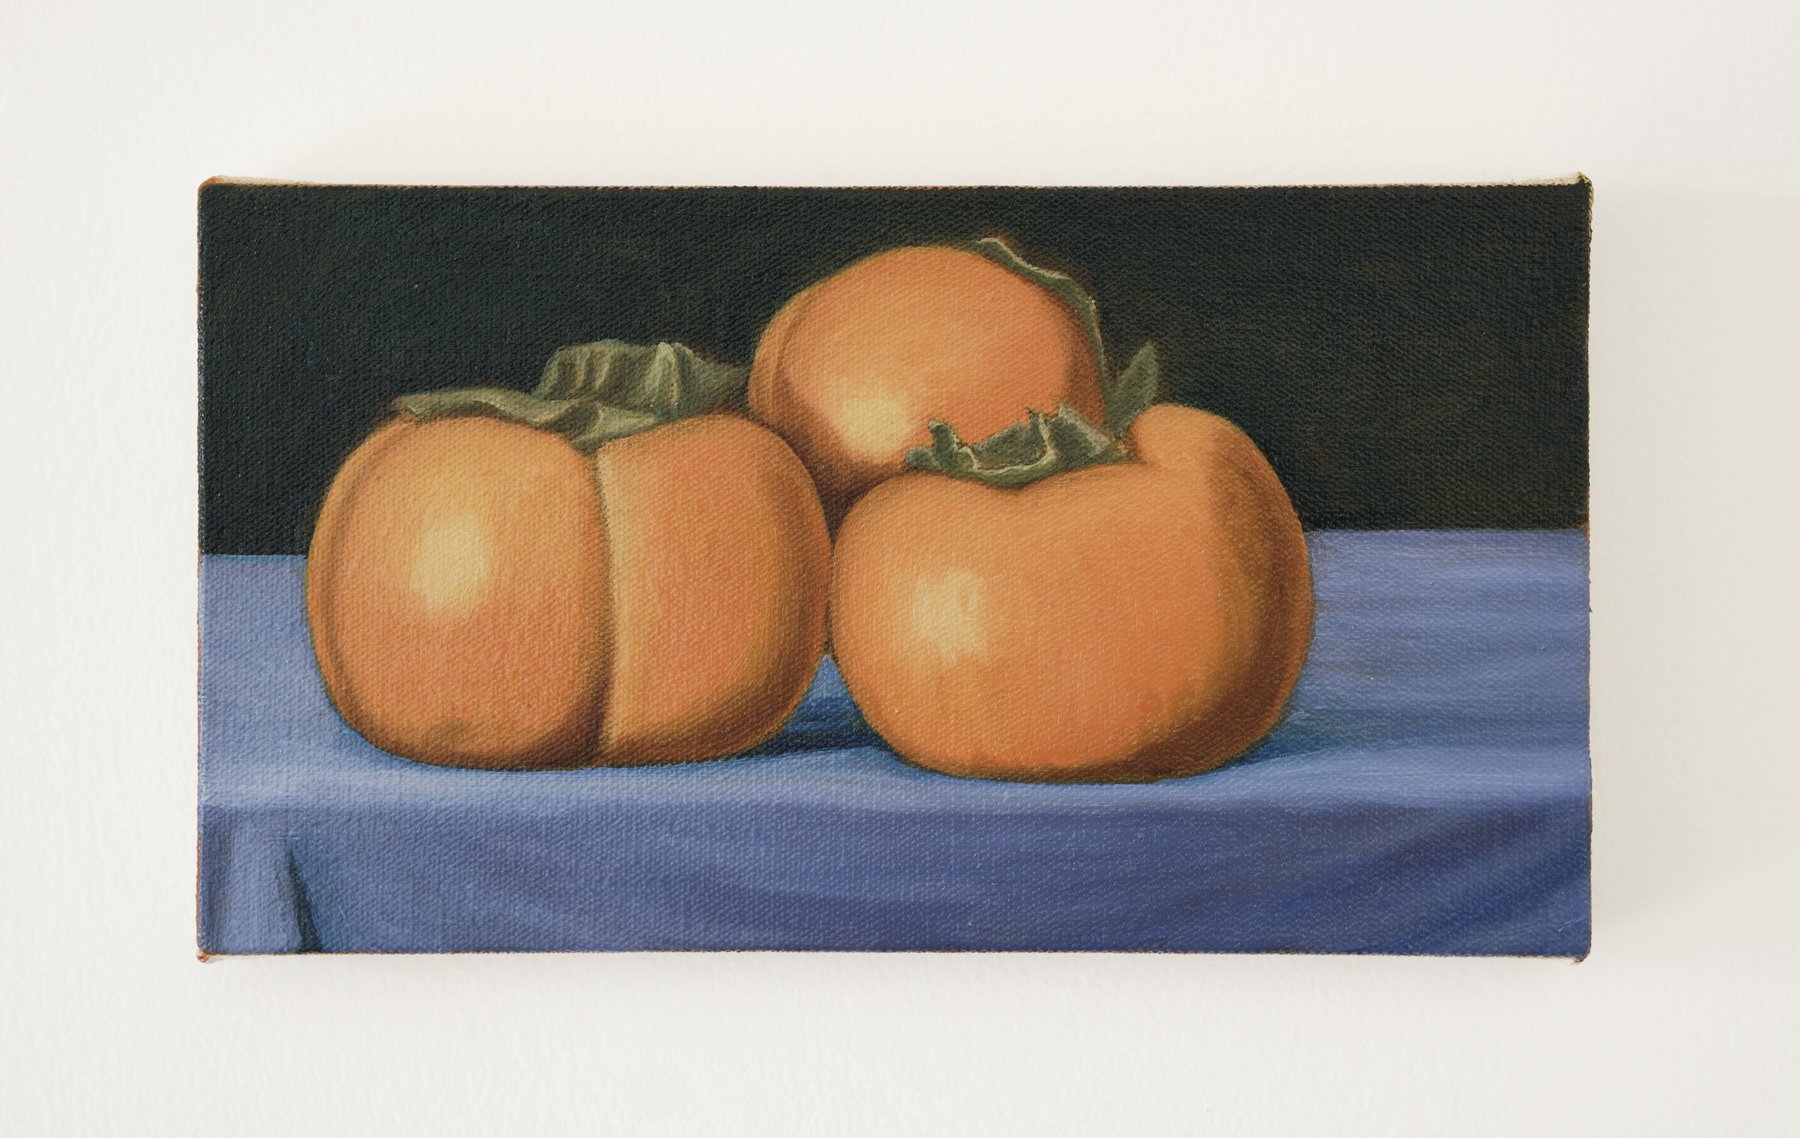 Persimmons, 2020. Oil on canvas. 6 x 10.5"